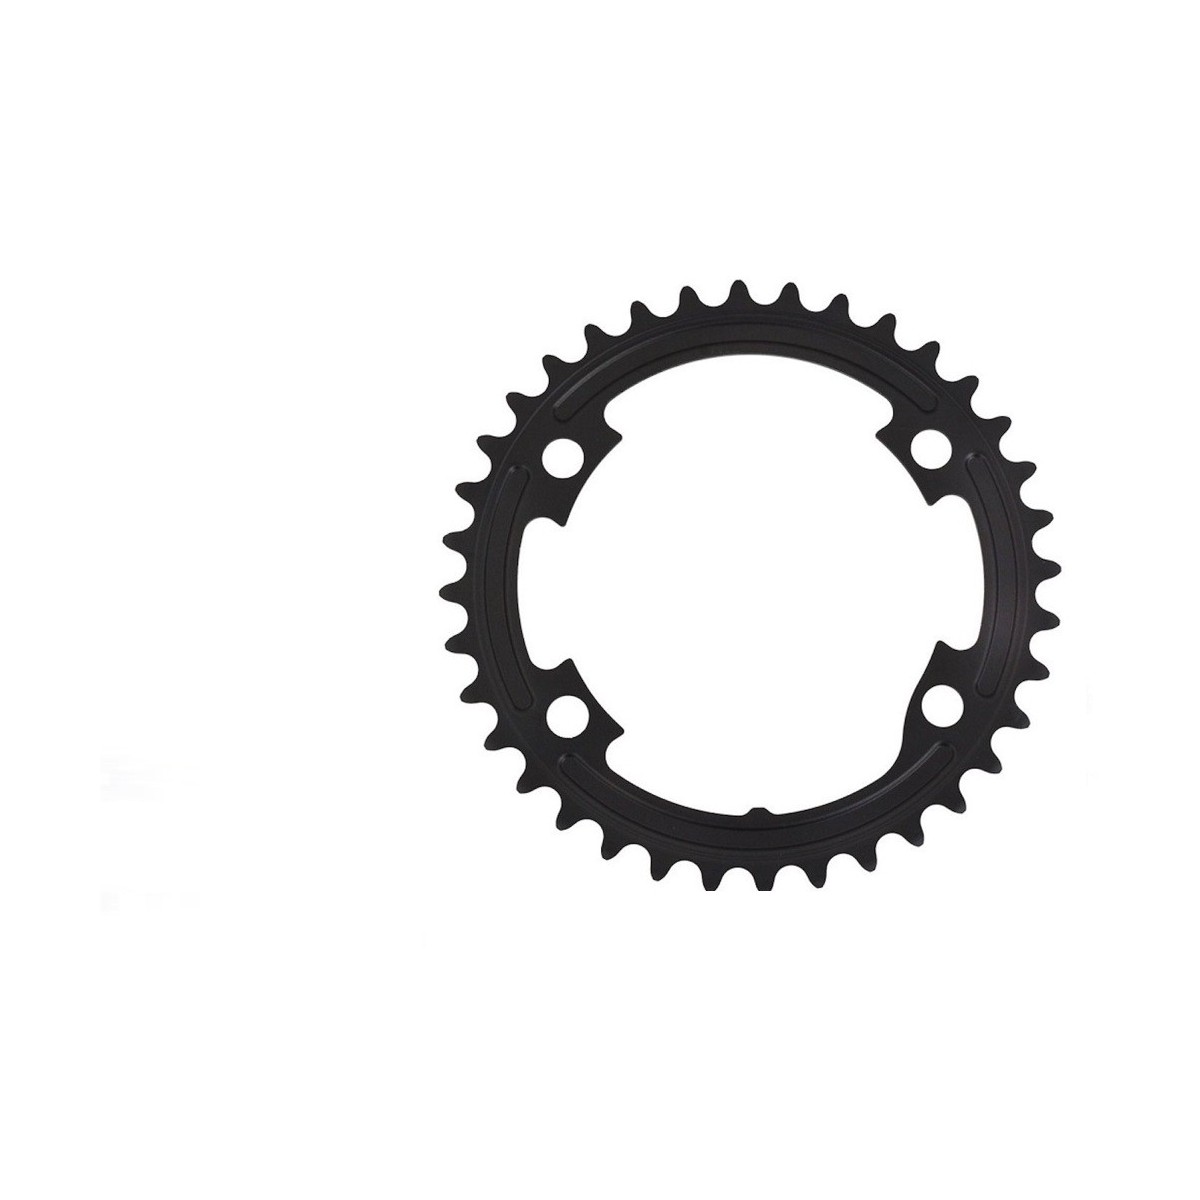 Shimano 105 FC-R7000 34T-MS chainrings